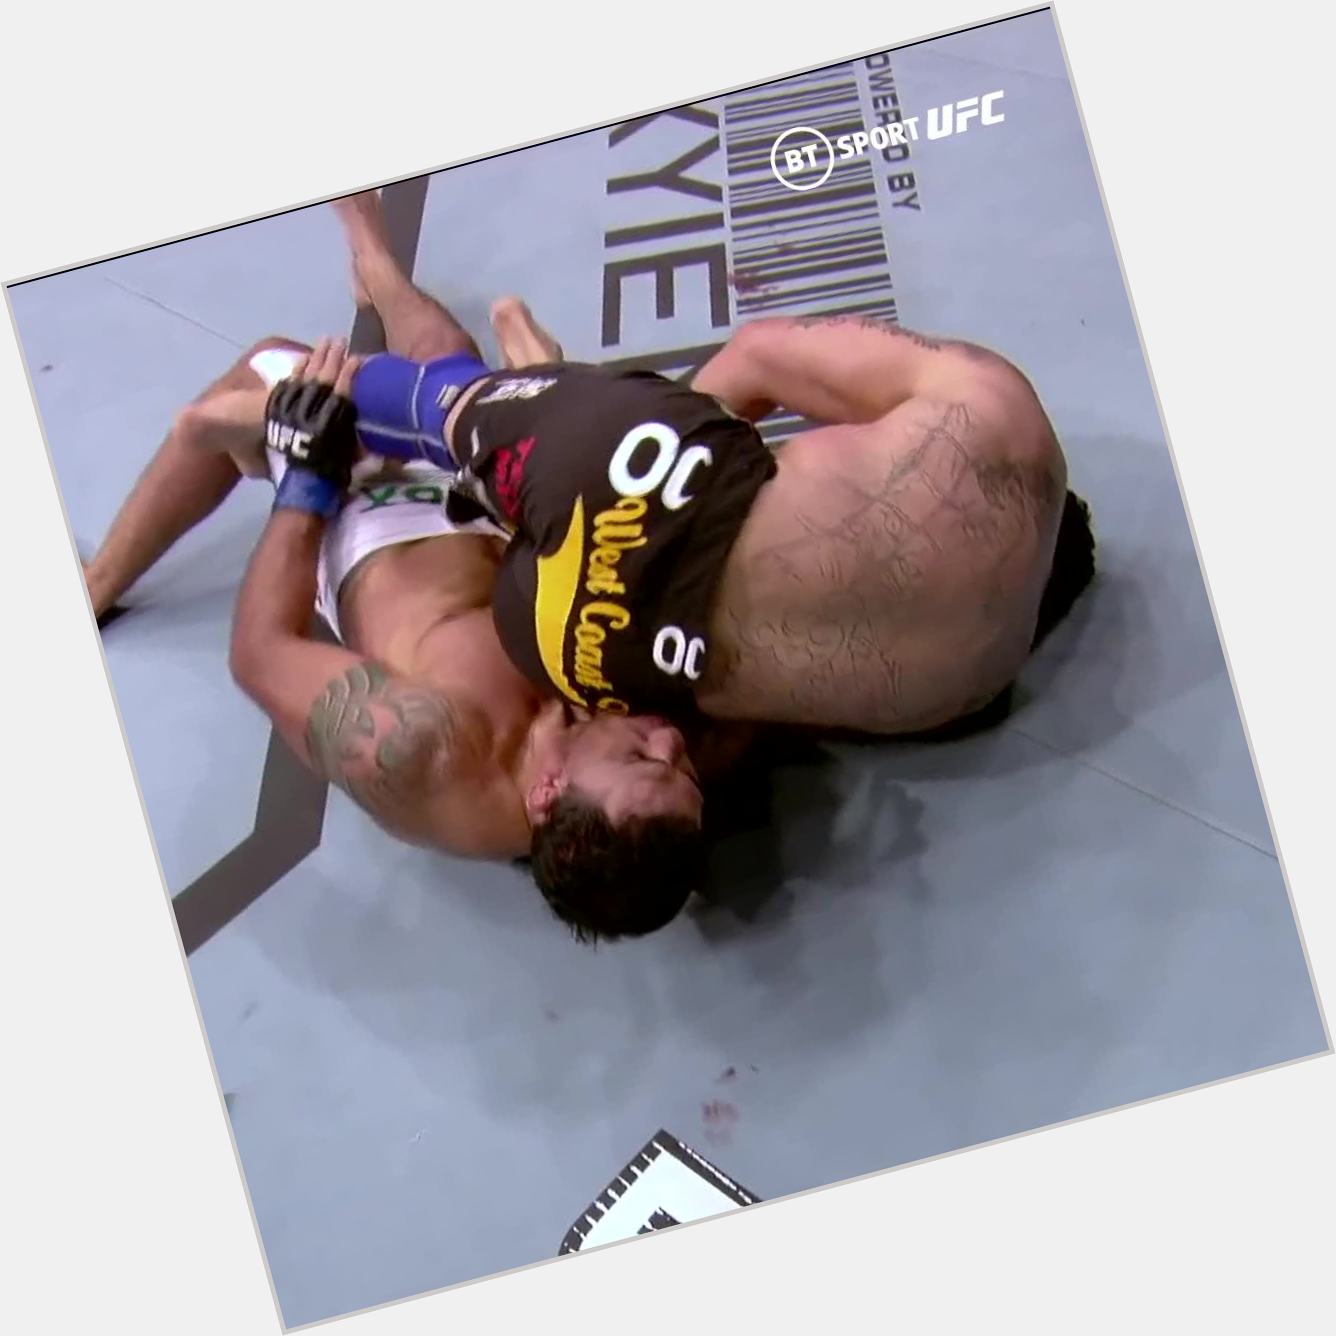 Happy birthday to Frank Mir!

Throwback to when he did the unthinkable and became the first man to submit Big Nog 